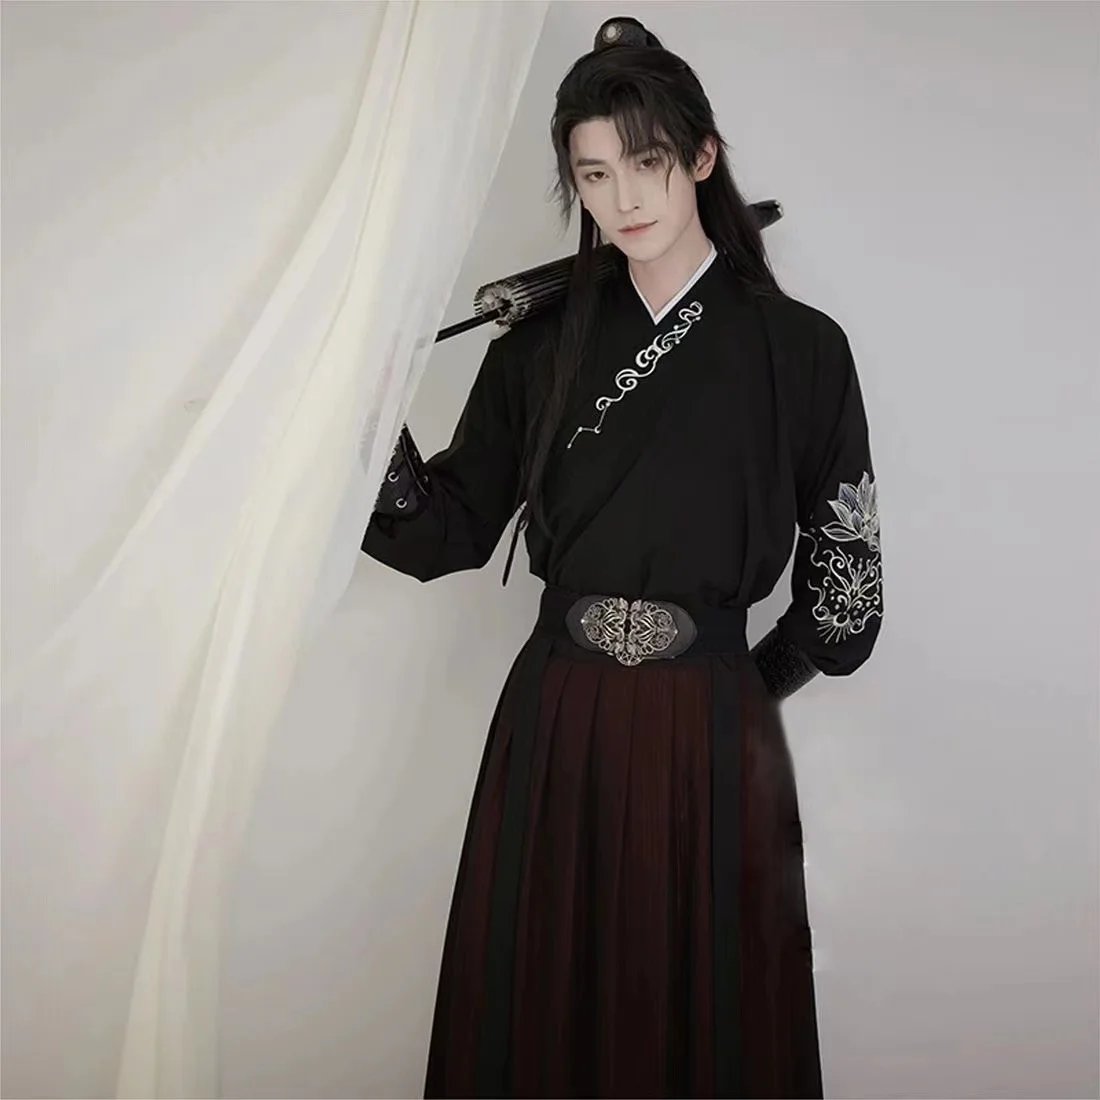 Chinese Style Hanfu Men Ancient Black Costume Hanfu Dress for Boys Girls Young Men Women Photography Cosplay Party Show Clothing f43555 90 degrees 15mm dual hole tube clip rod clamp adapter dslr camera photography accessories black